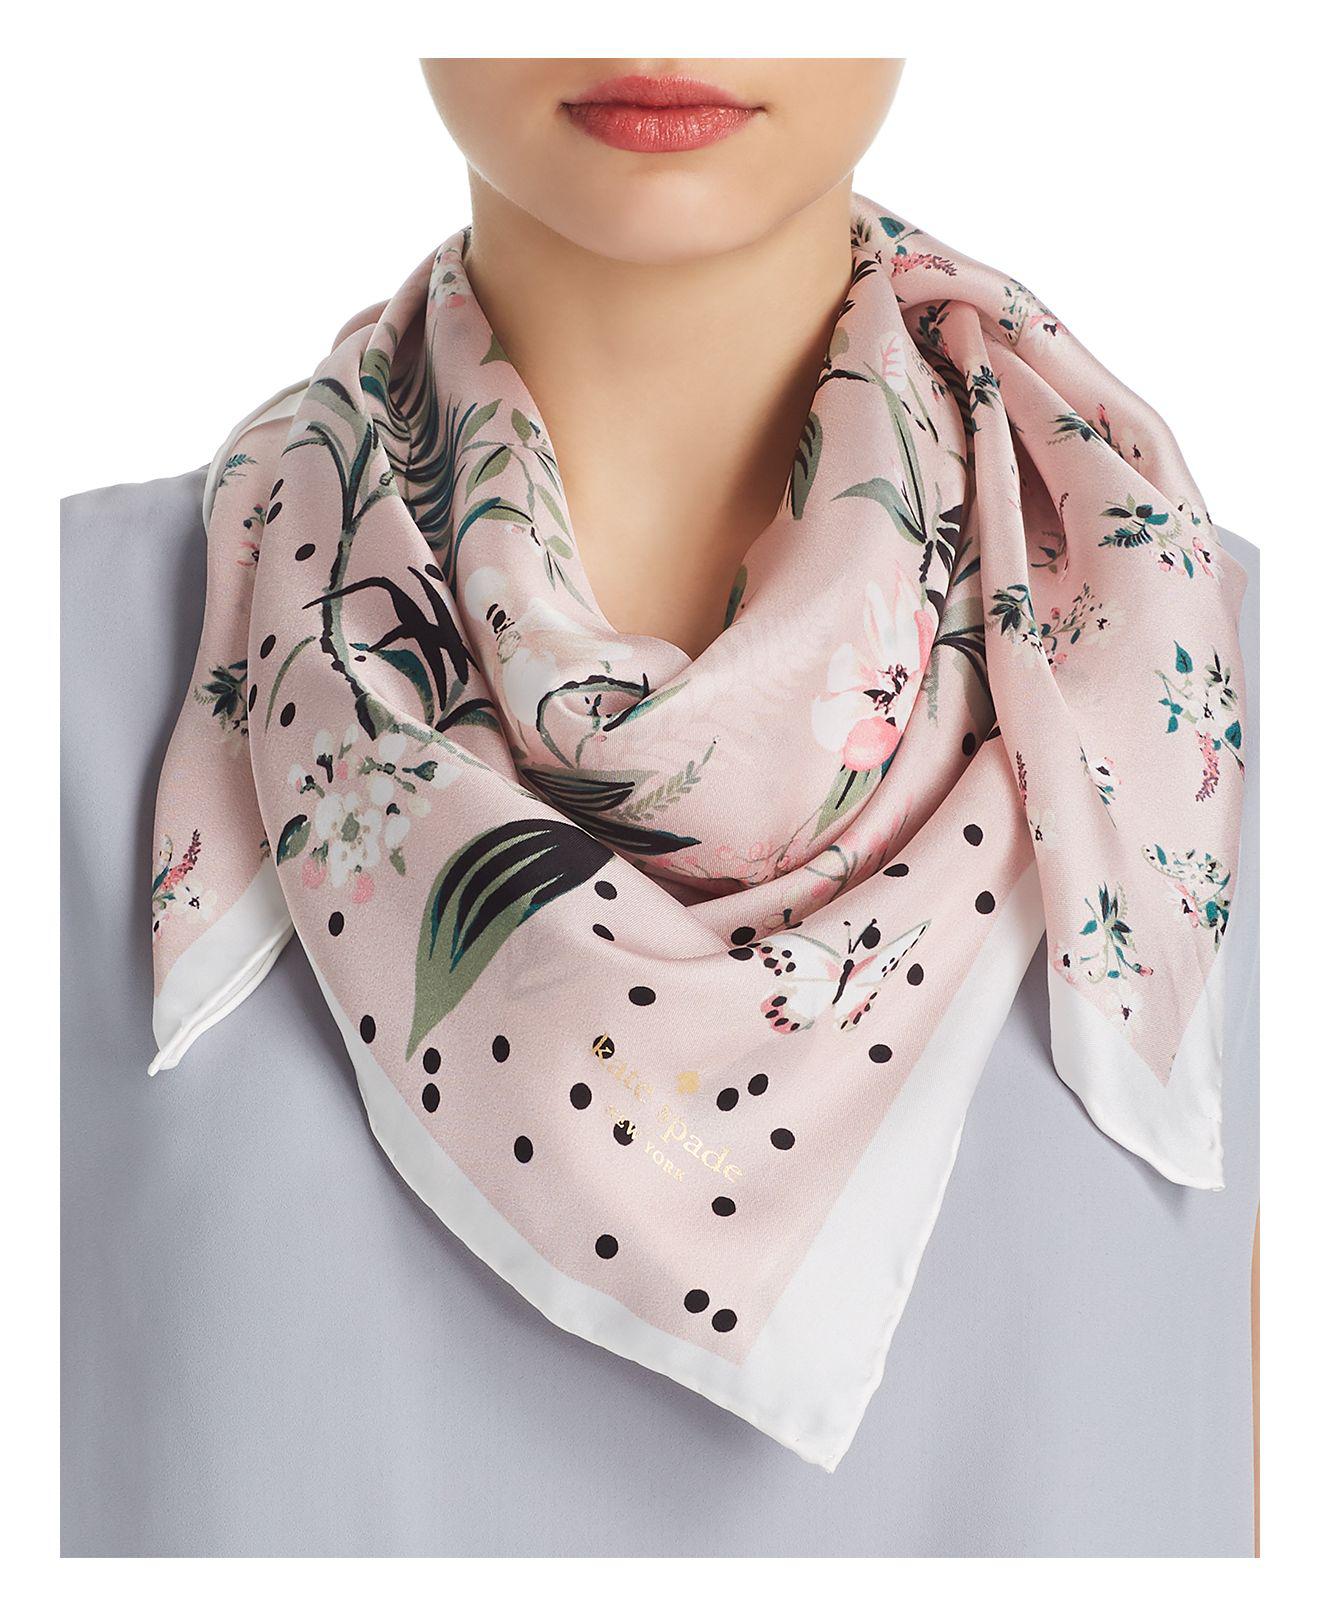 Kate Spade Botanical Patchwork Silk Square Scarf in Pink - Lyst